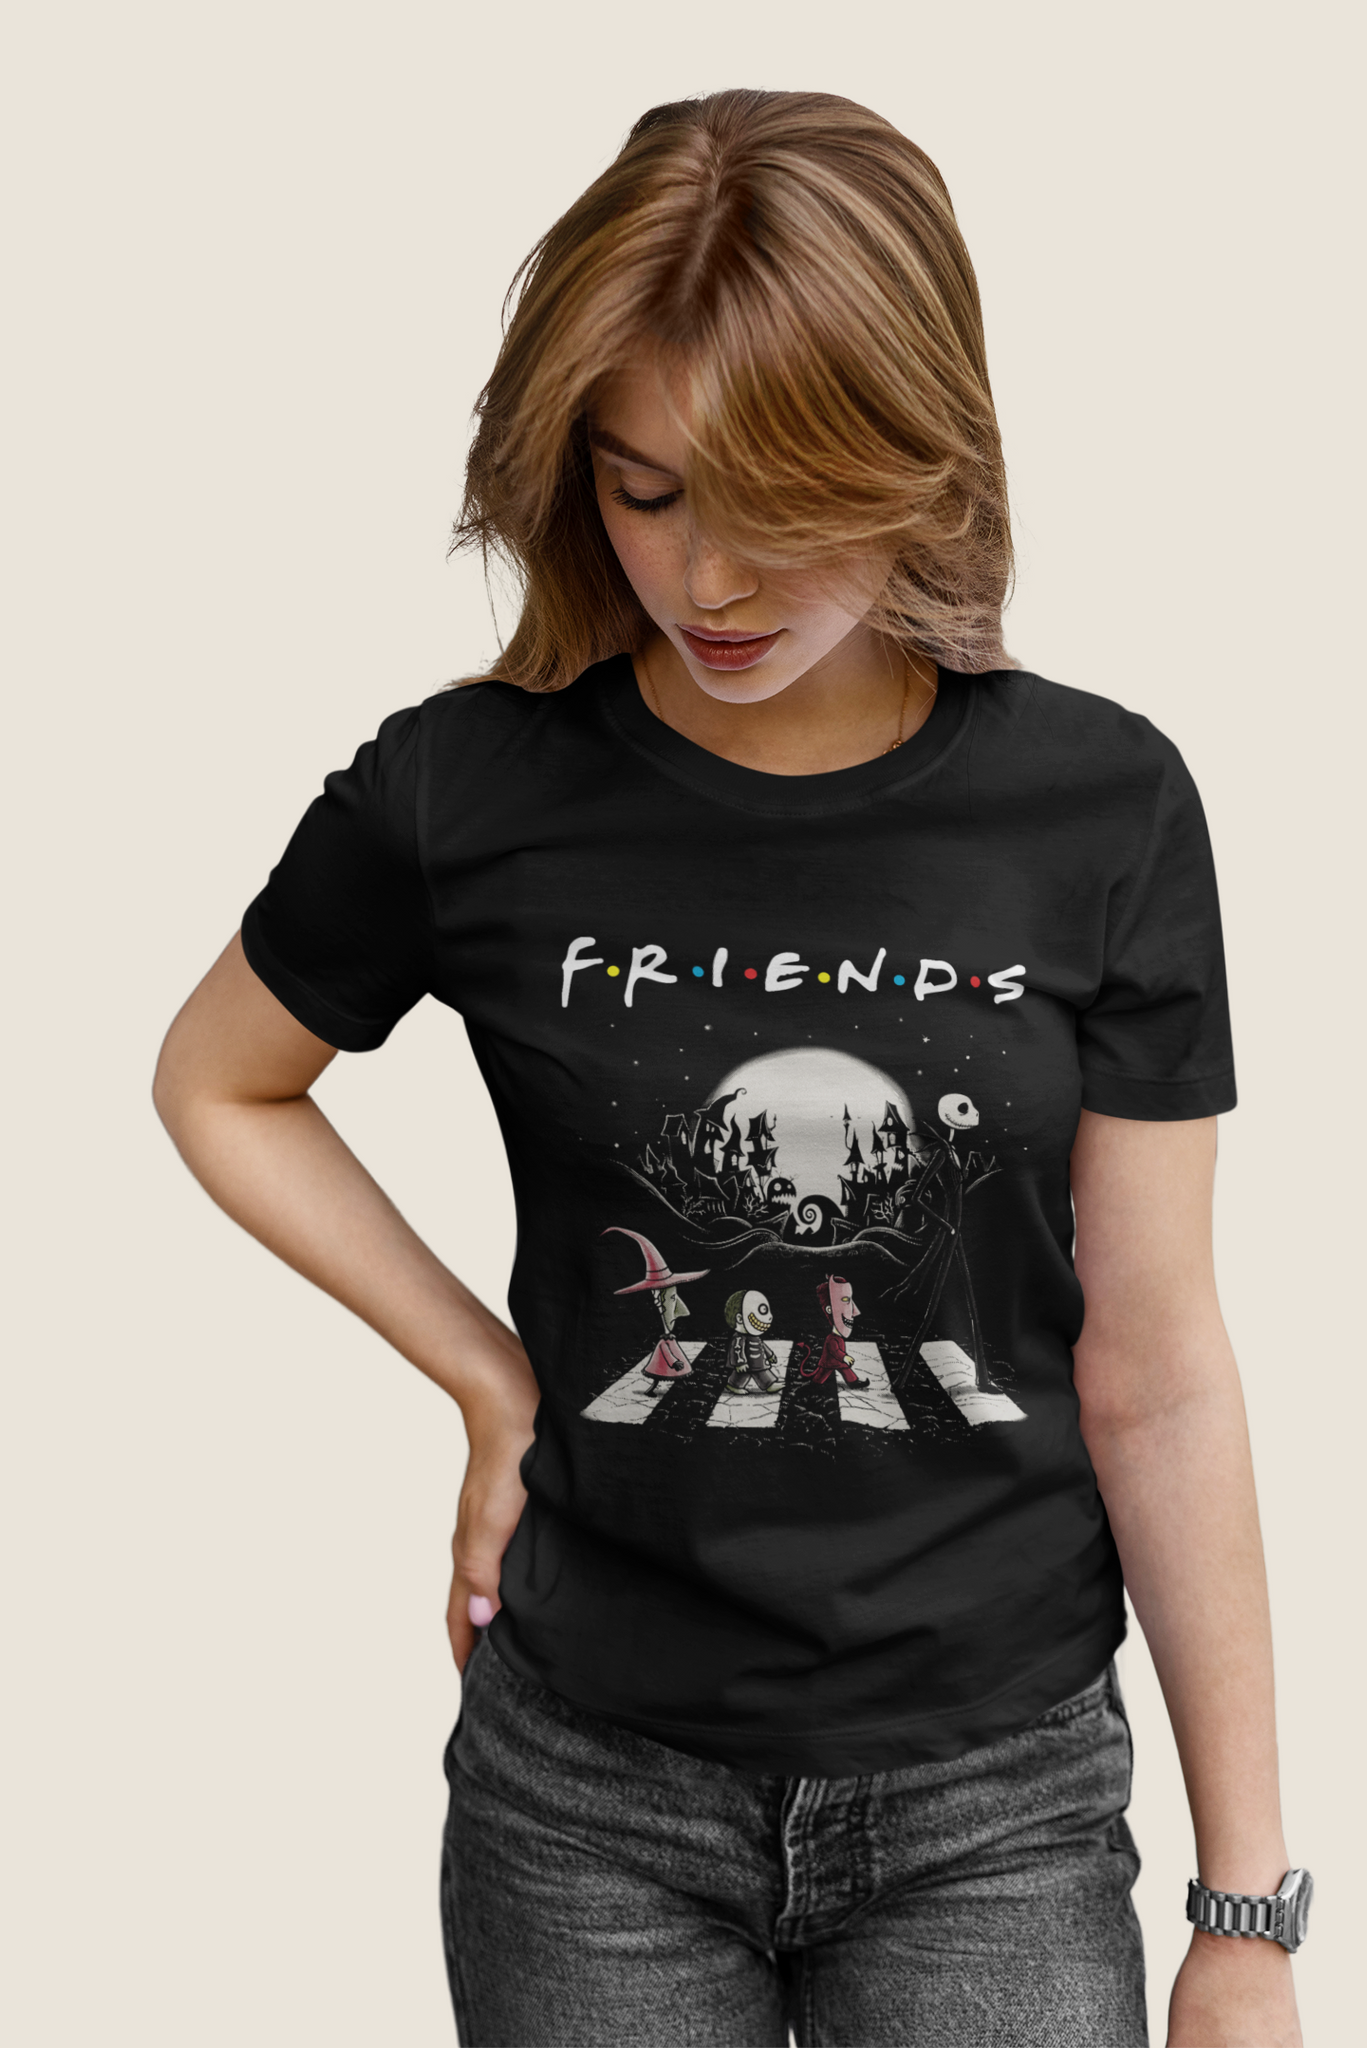 Nightmare Before Christmas T Shirt, Abbey Road Tshirt, Jack Skellington And Friends Shirt, Horror Character T Shirt, Halloween Gifts